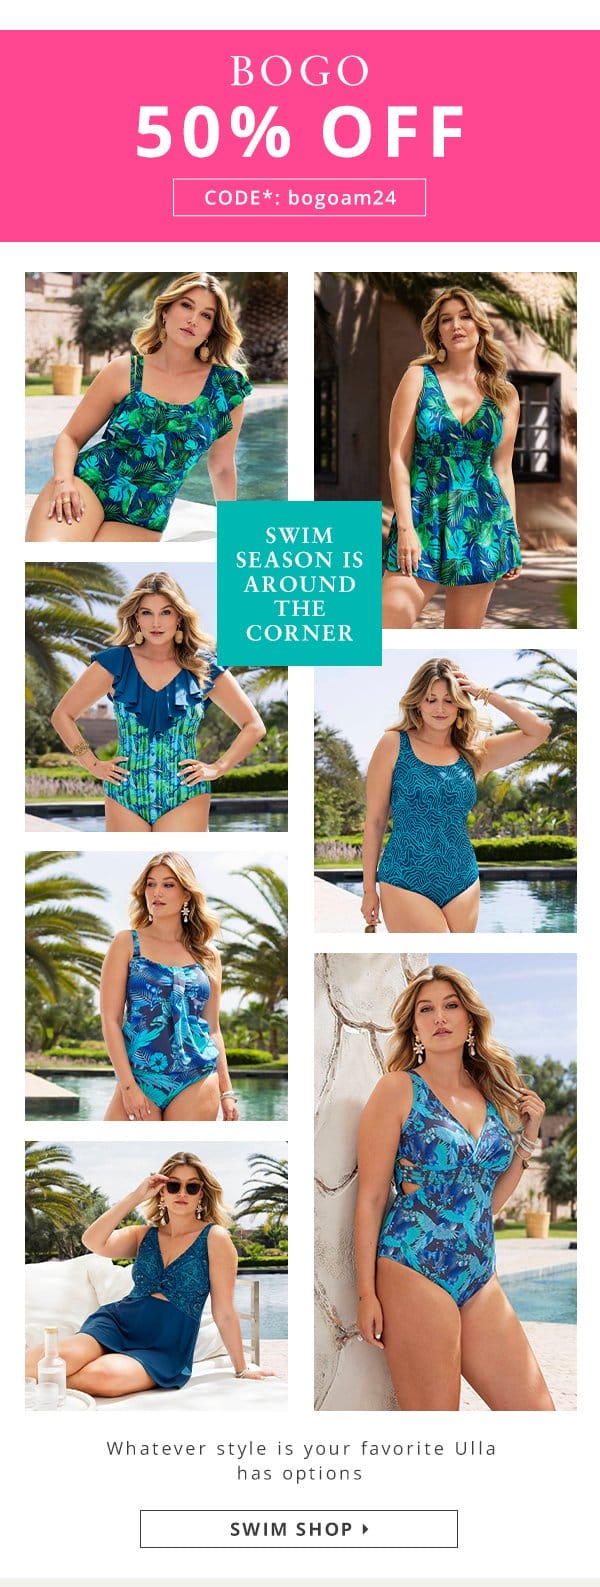 Swim season is around the corner. Whatever style is your favorite Ulla has an options.